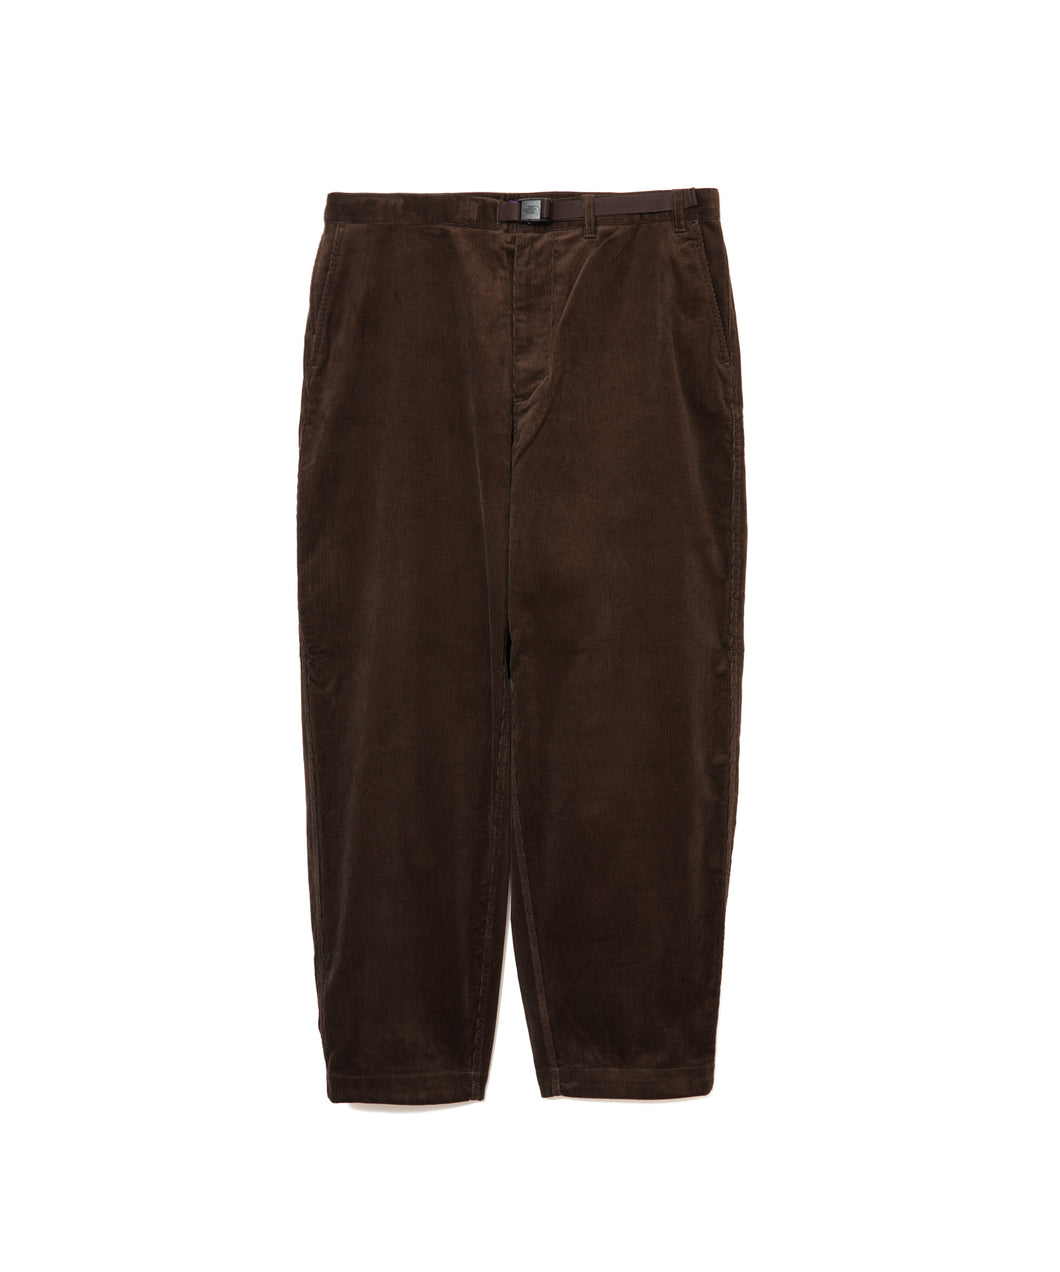 【MEN】THE NORTH FACE PURPLE LABEL Corduroy Wide Tapered Field Pants